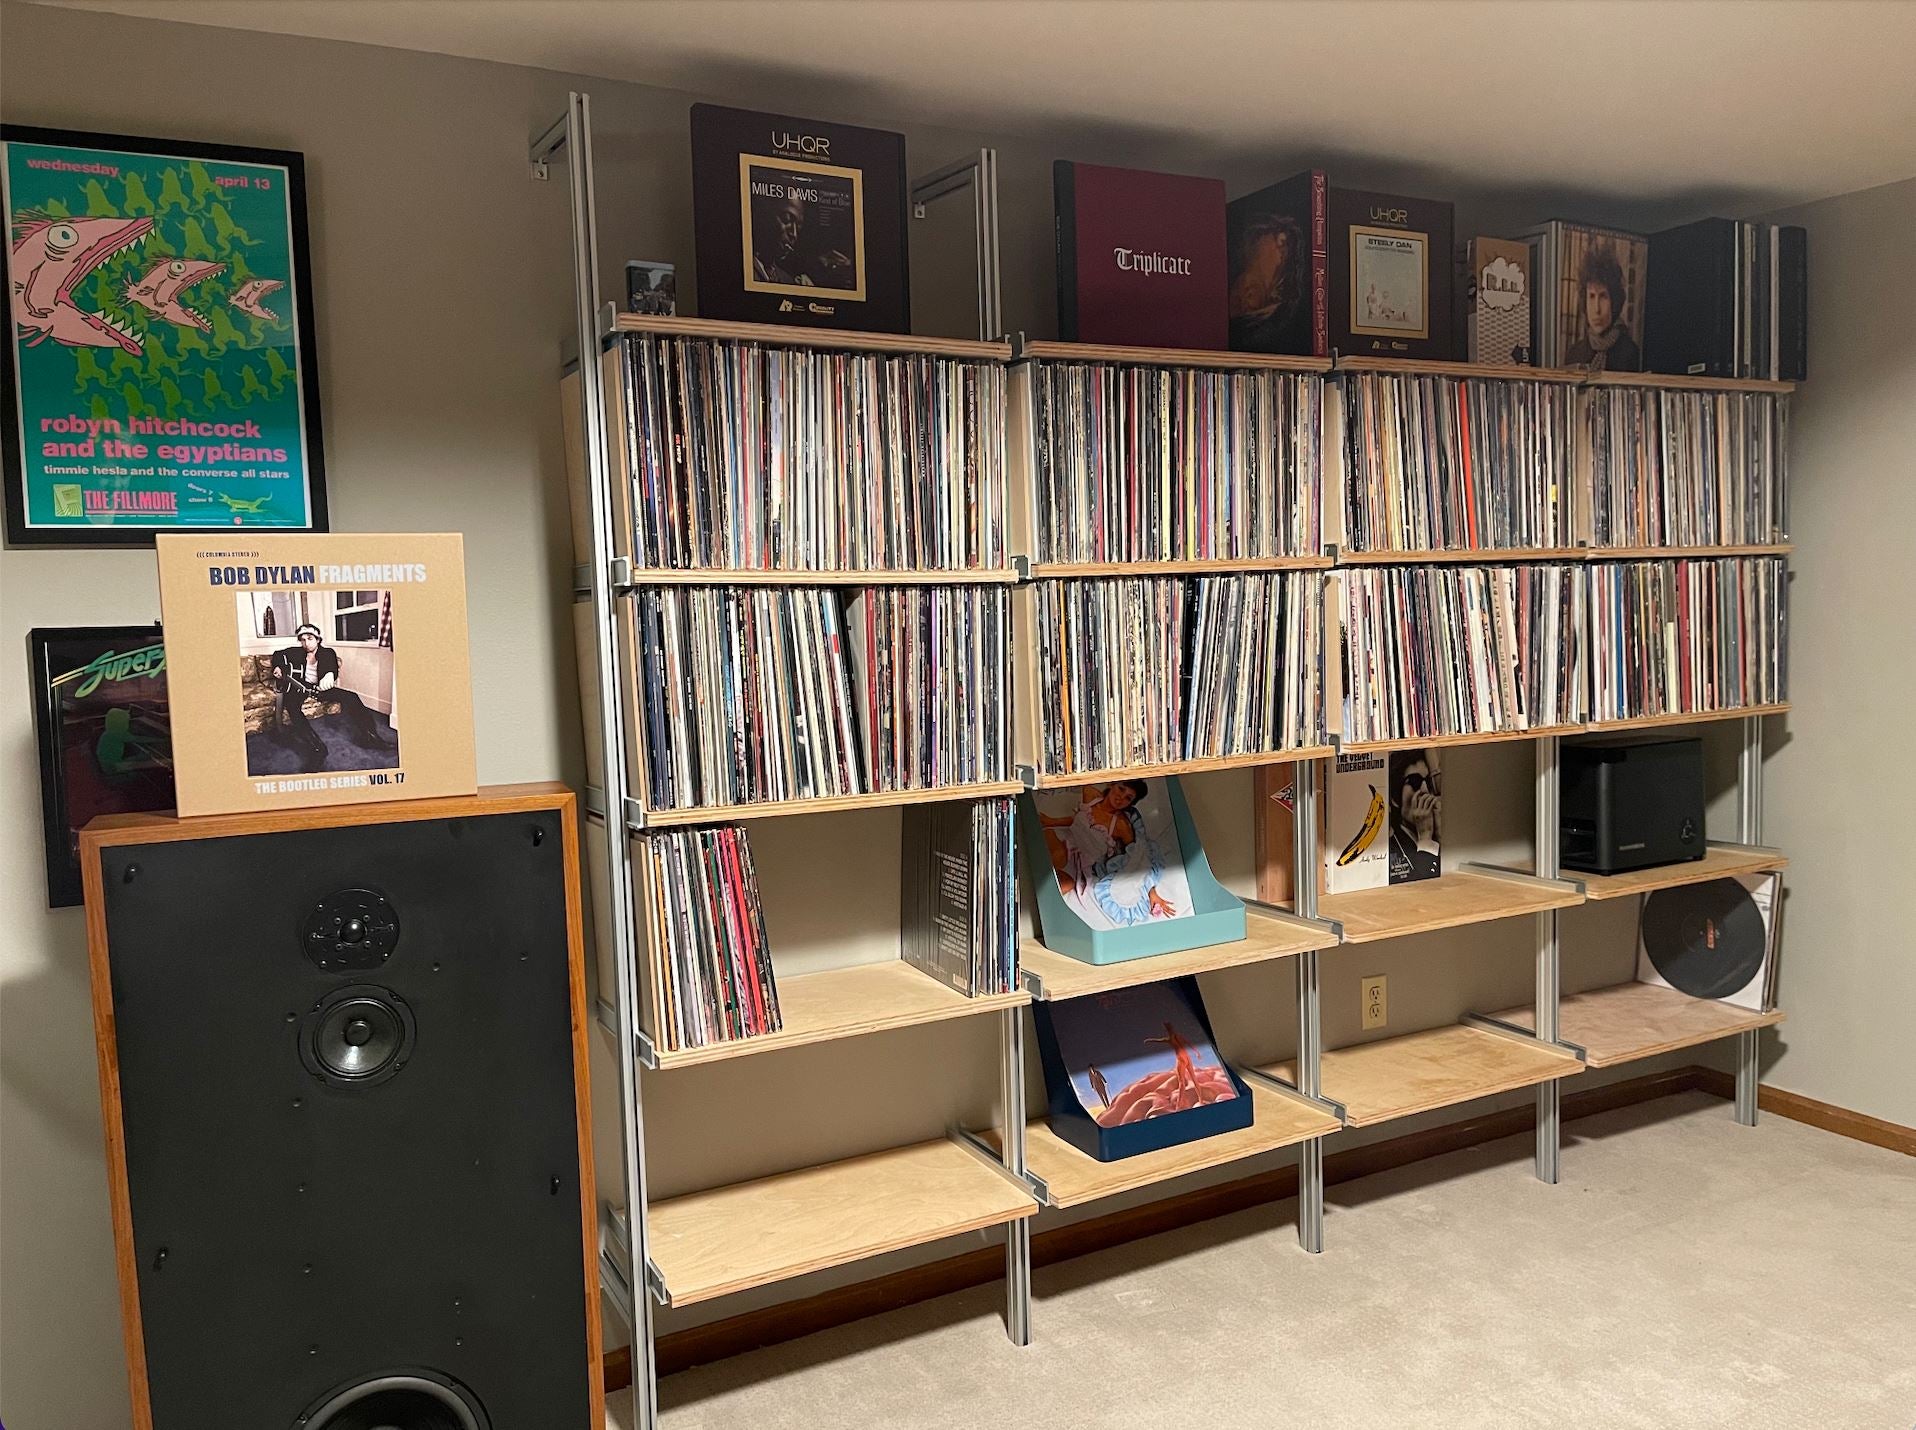 Vinyl Collector Uses Shelves to House Growing Record Collection